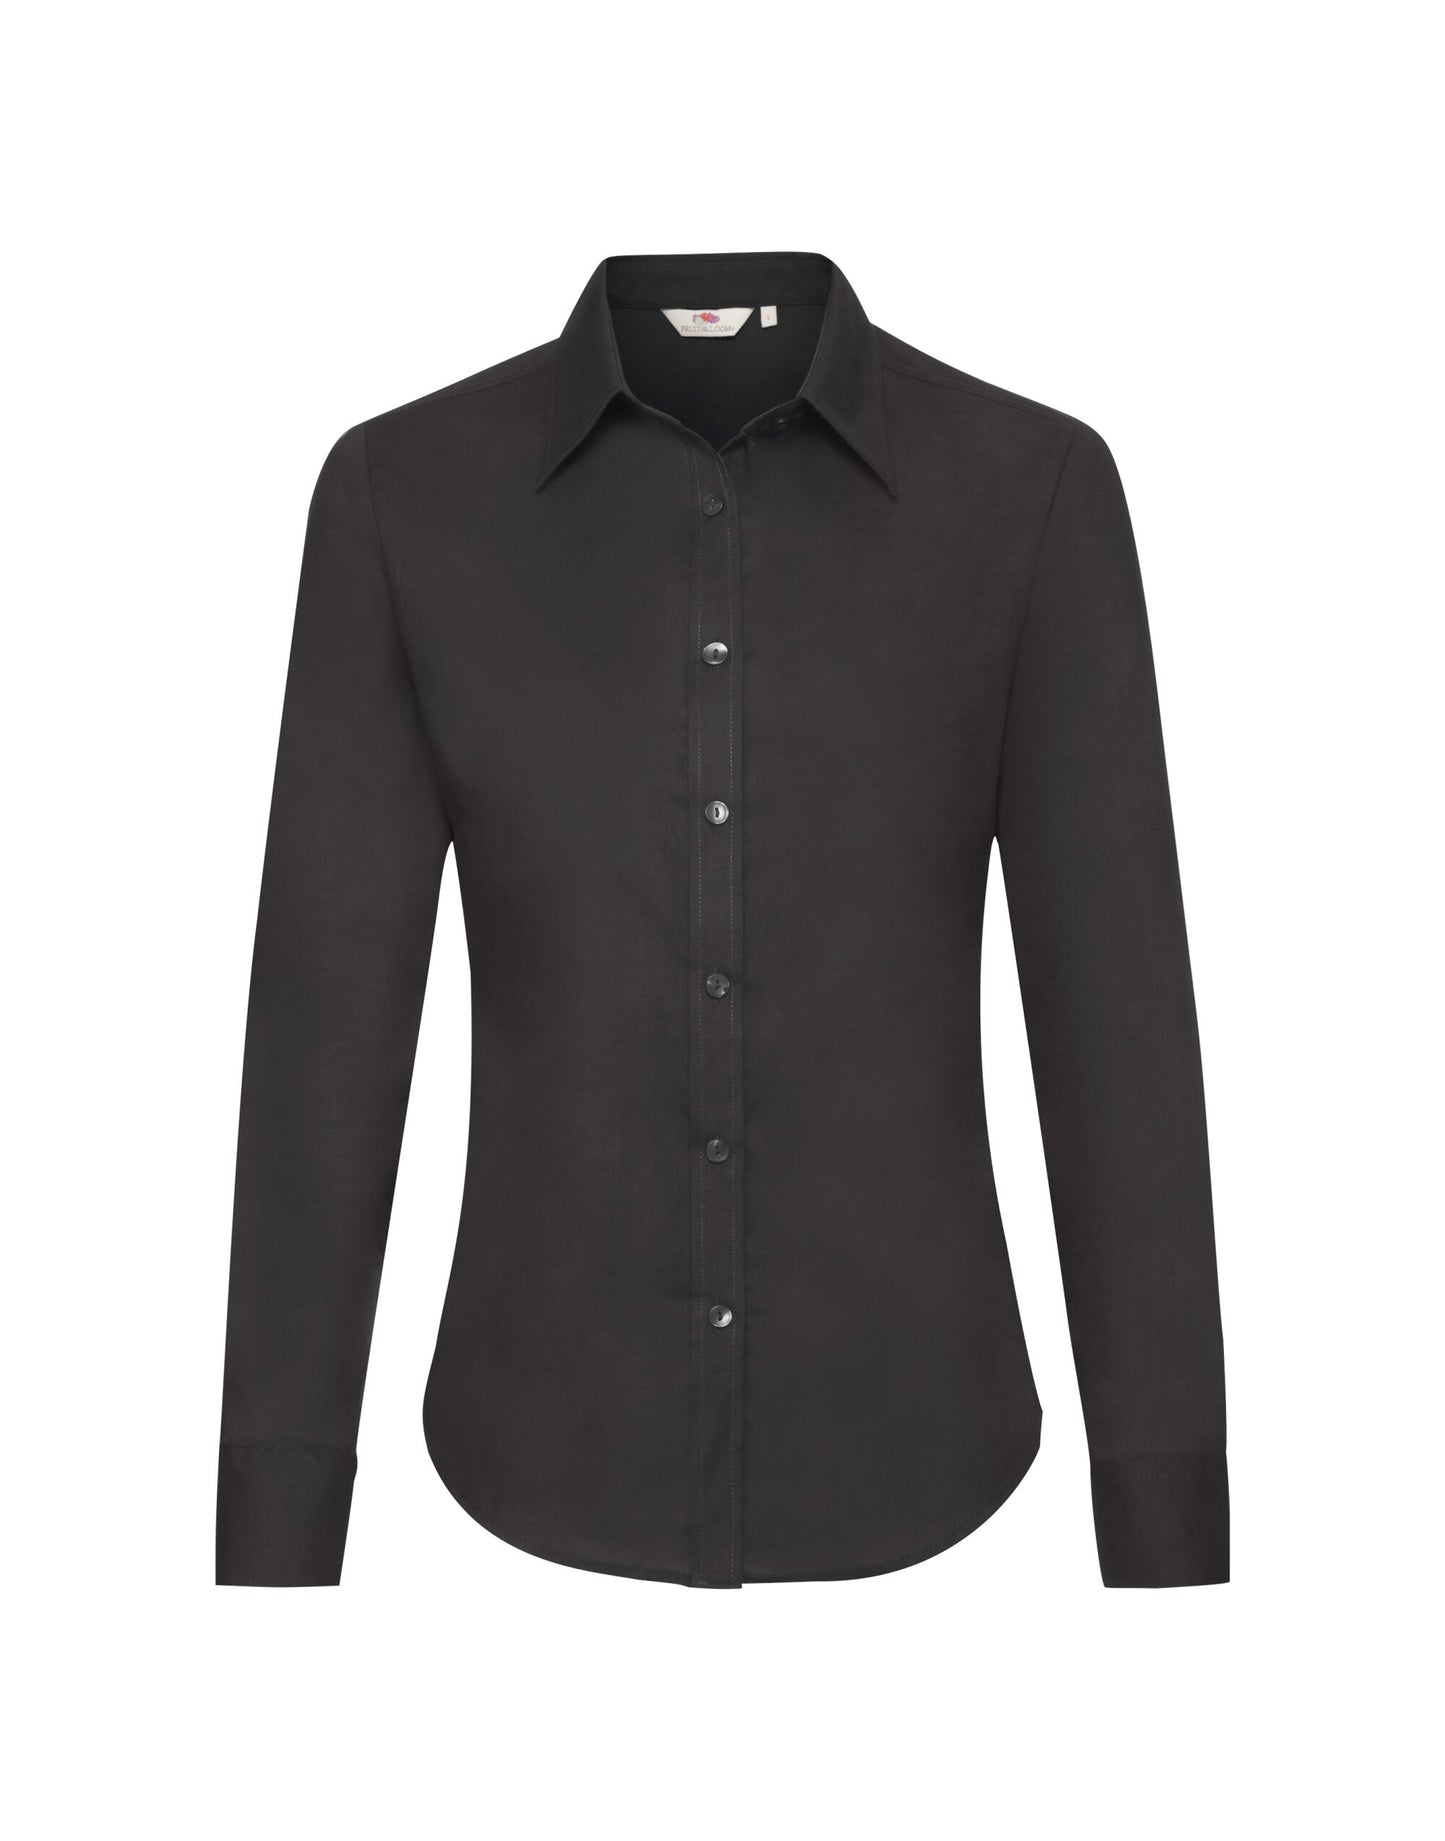 Fruit of the Loom Lady-Fit Long Sleeve Oxford Shirt